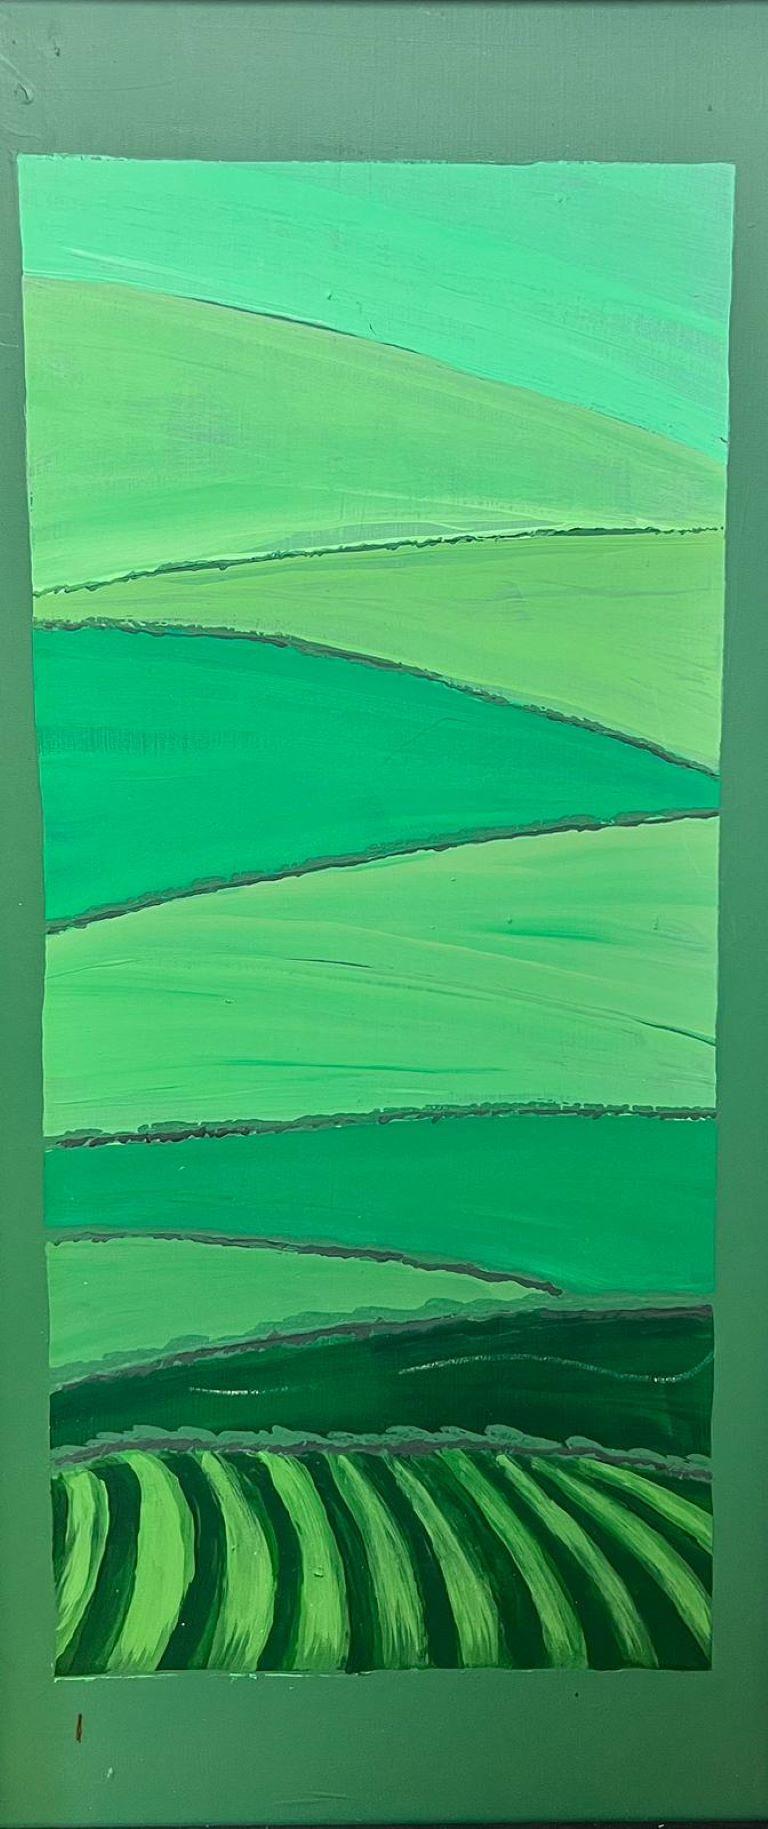 Contemporary British Abstract Painting - Abstract Geometric Cubist British Painting Abstract Shapes Green Shapes